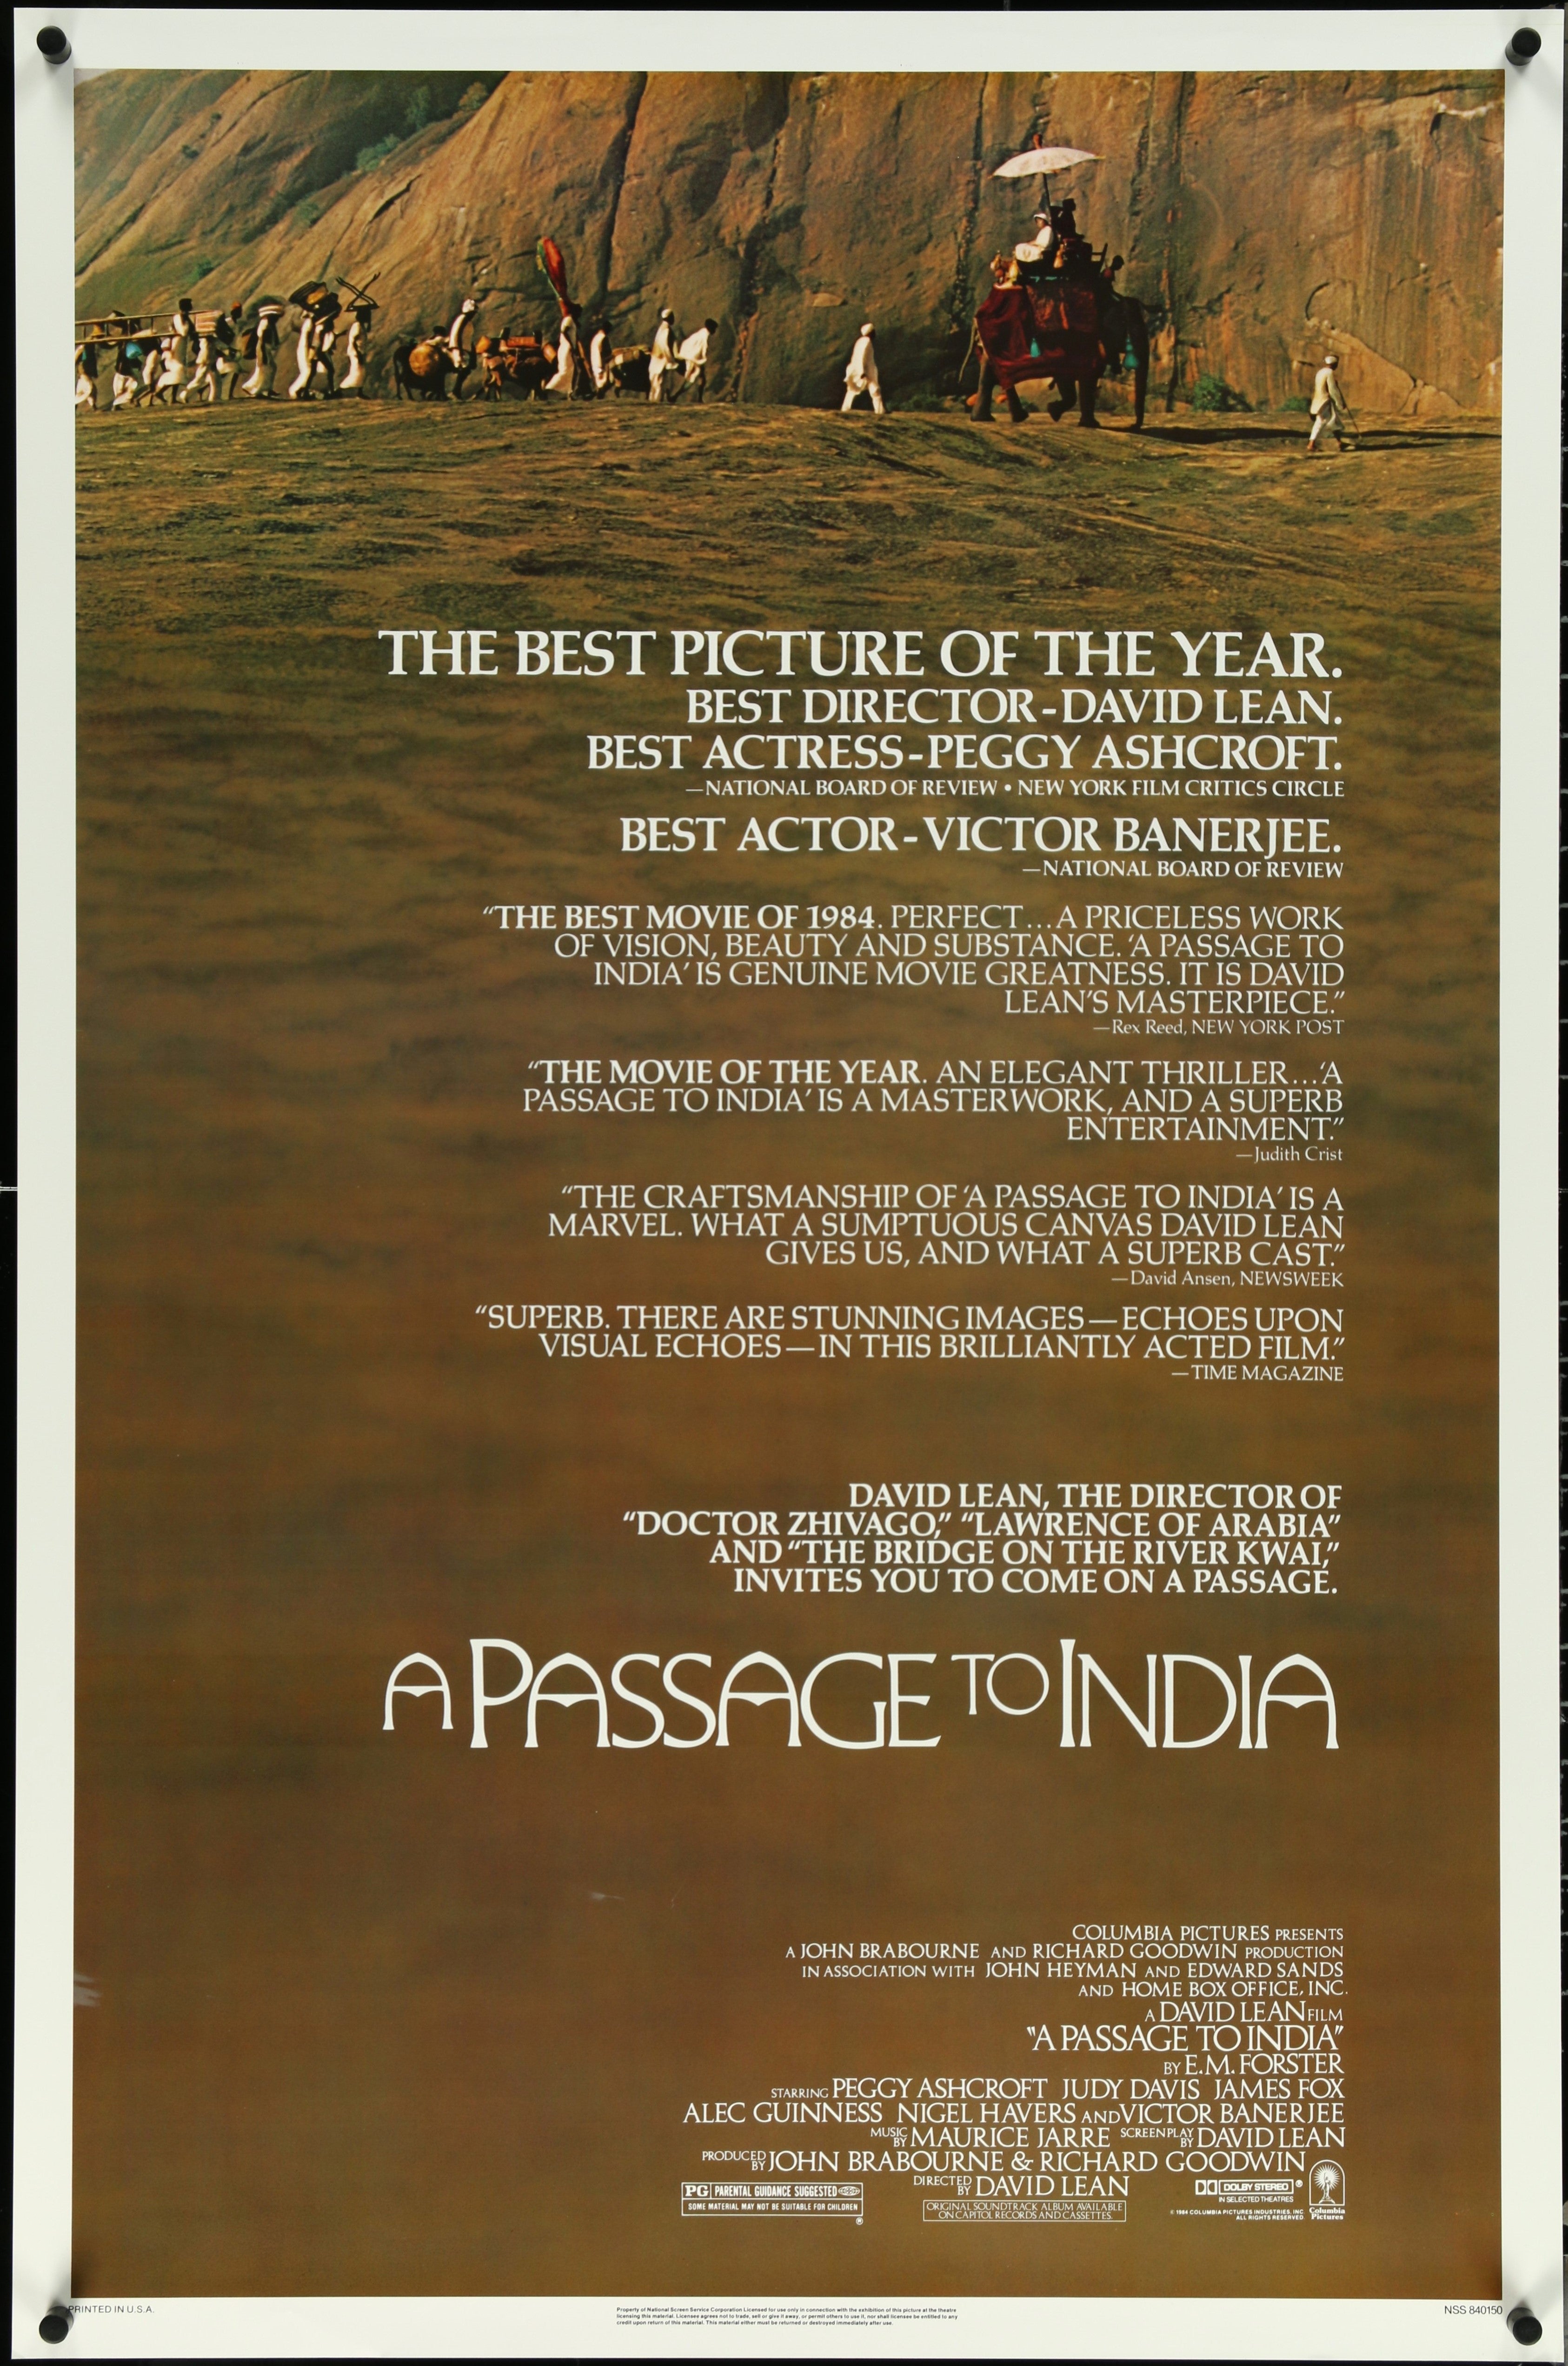 A PASSAGE TO INDIA (1984)